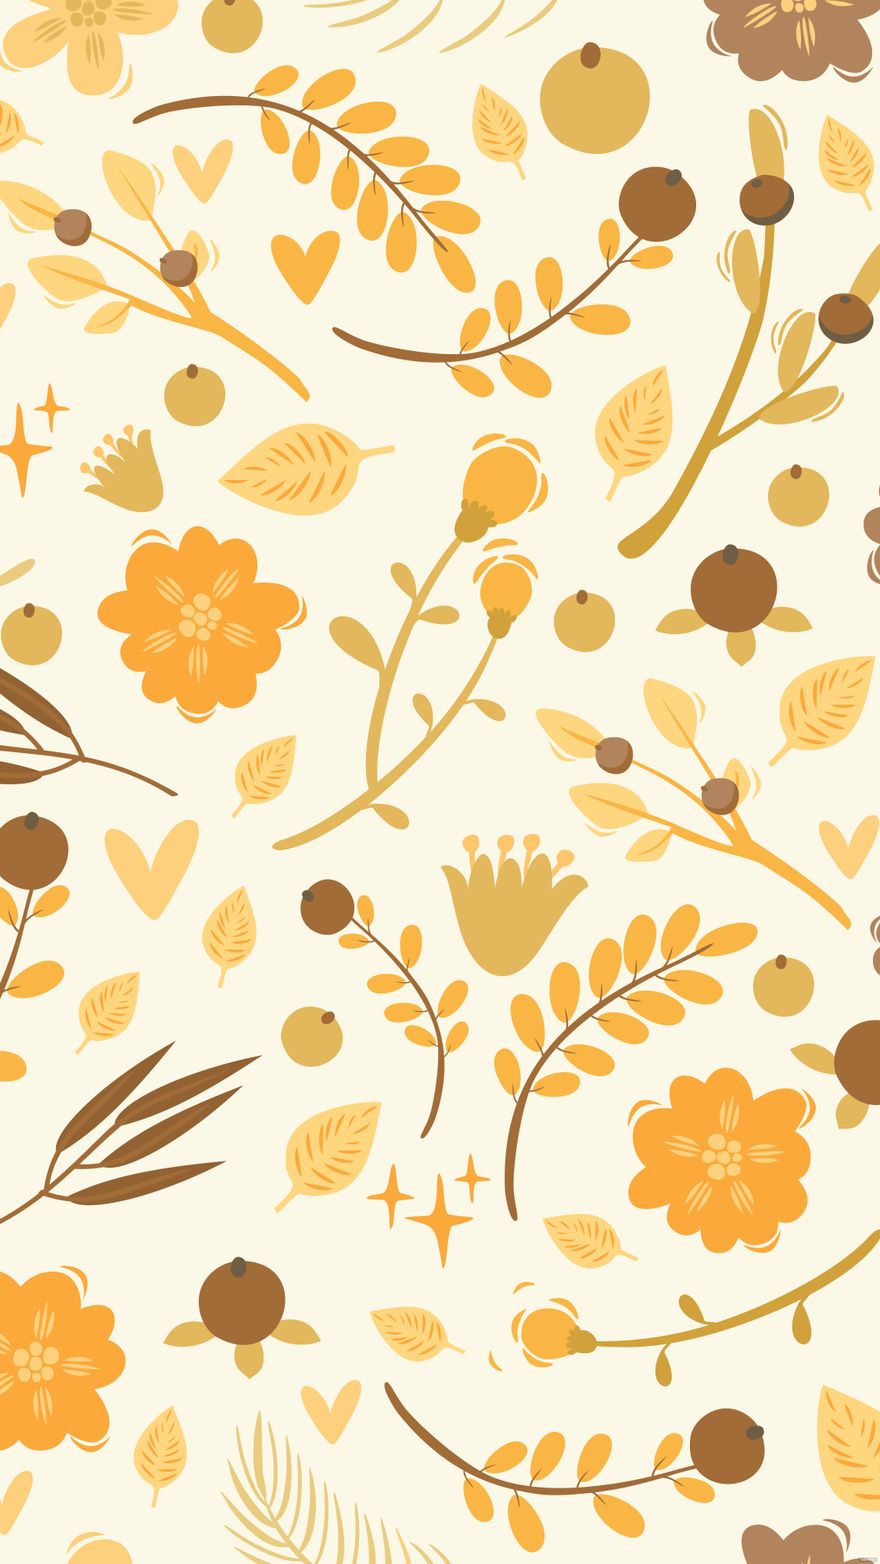 Free Fall Floral iPhone Background in Illustrator, EPS, SVG, JPG